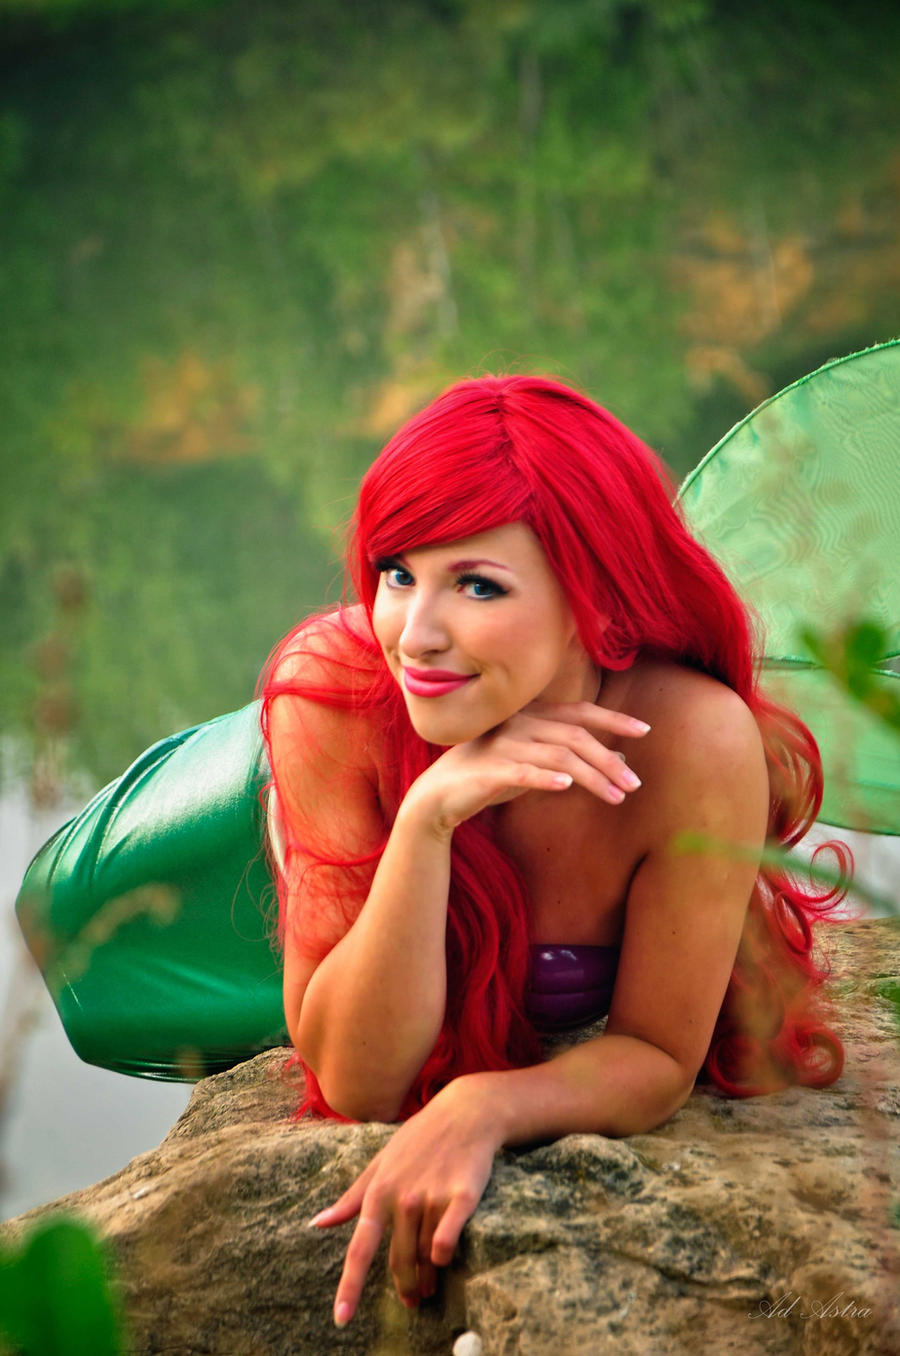 Ariel on a stone cosplay